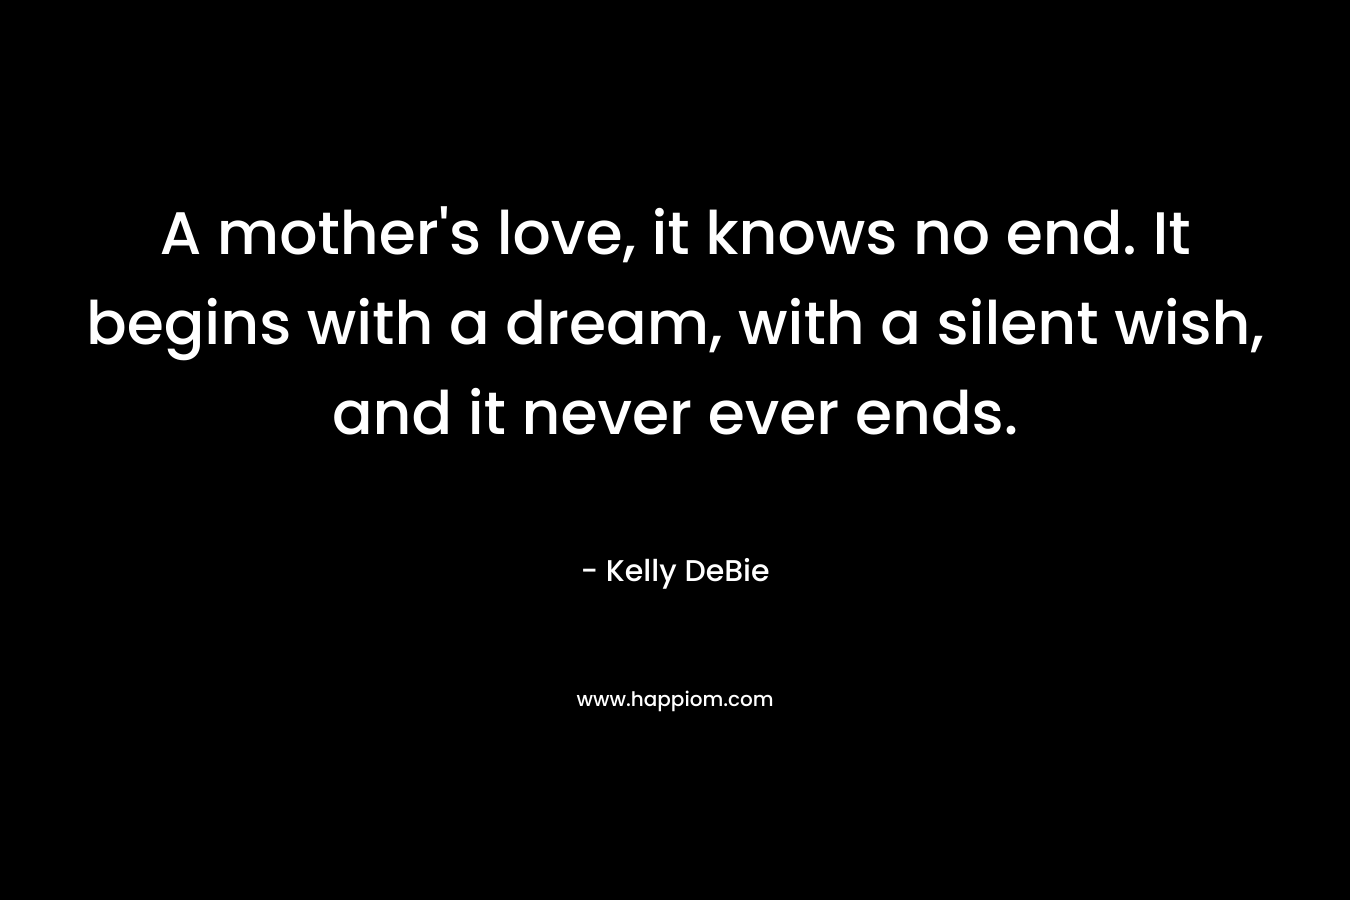 A mother's love, it knows no end. It begins with a dream, with a silent wish, and it never ever ends.